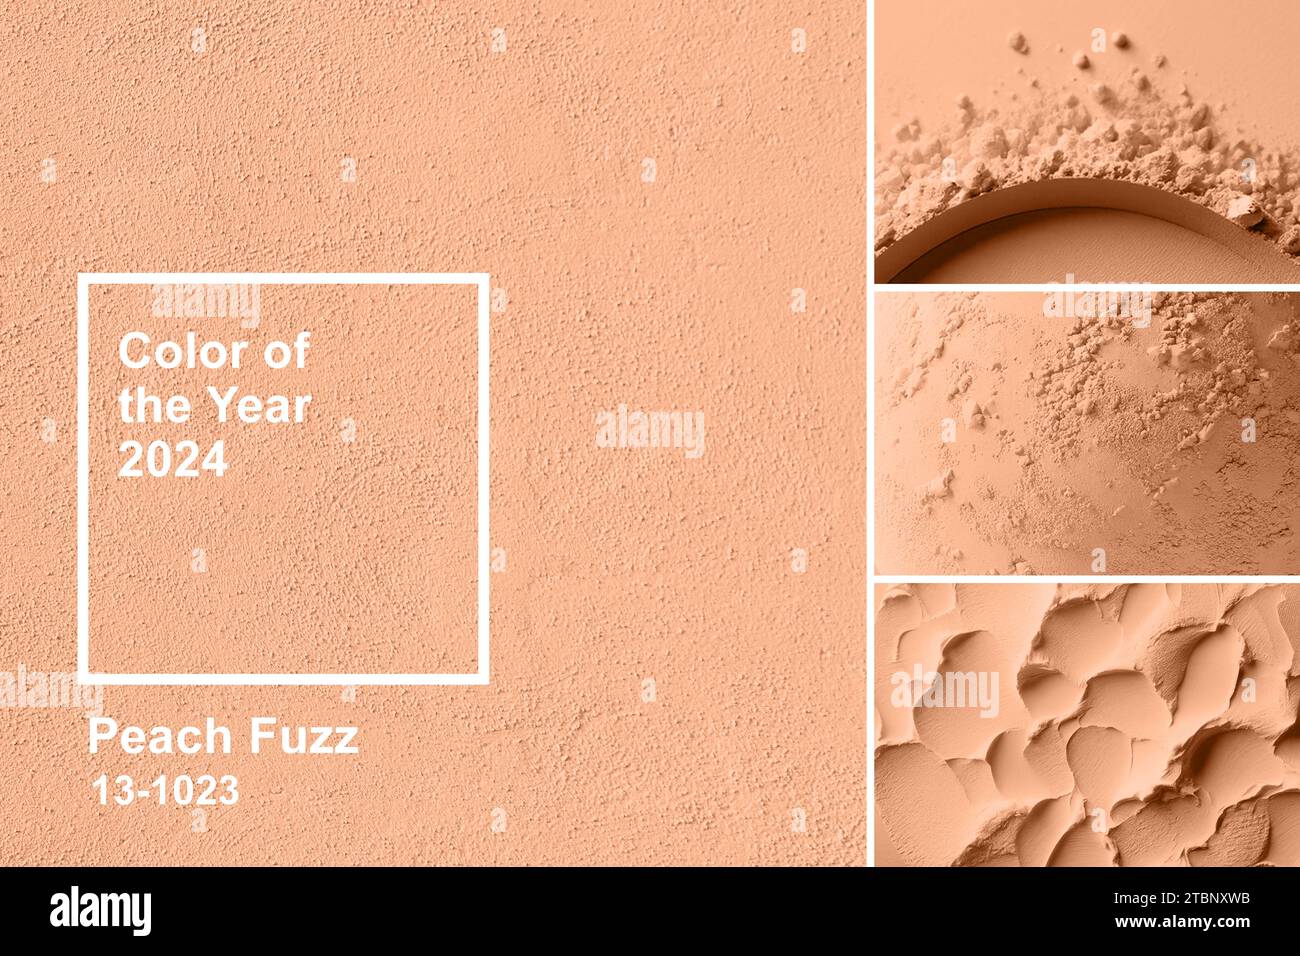 Peach fuzz is color of year 2024. Multiple textures surface in collage toned in fashion blended pink-orange trend-setting colour of the year Peach Fuz Stock Photo